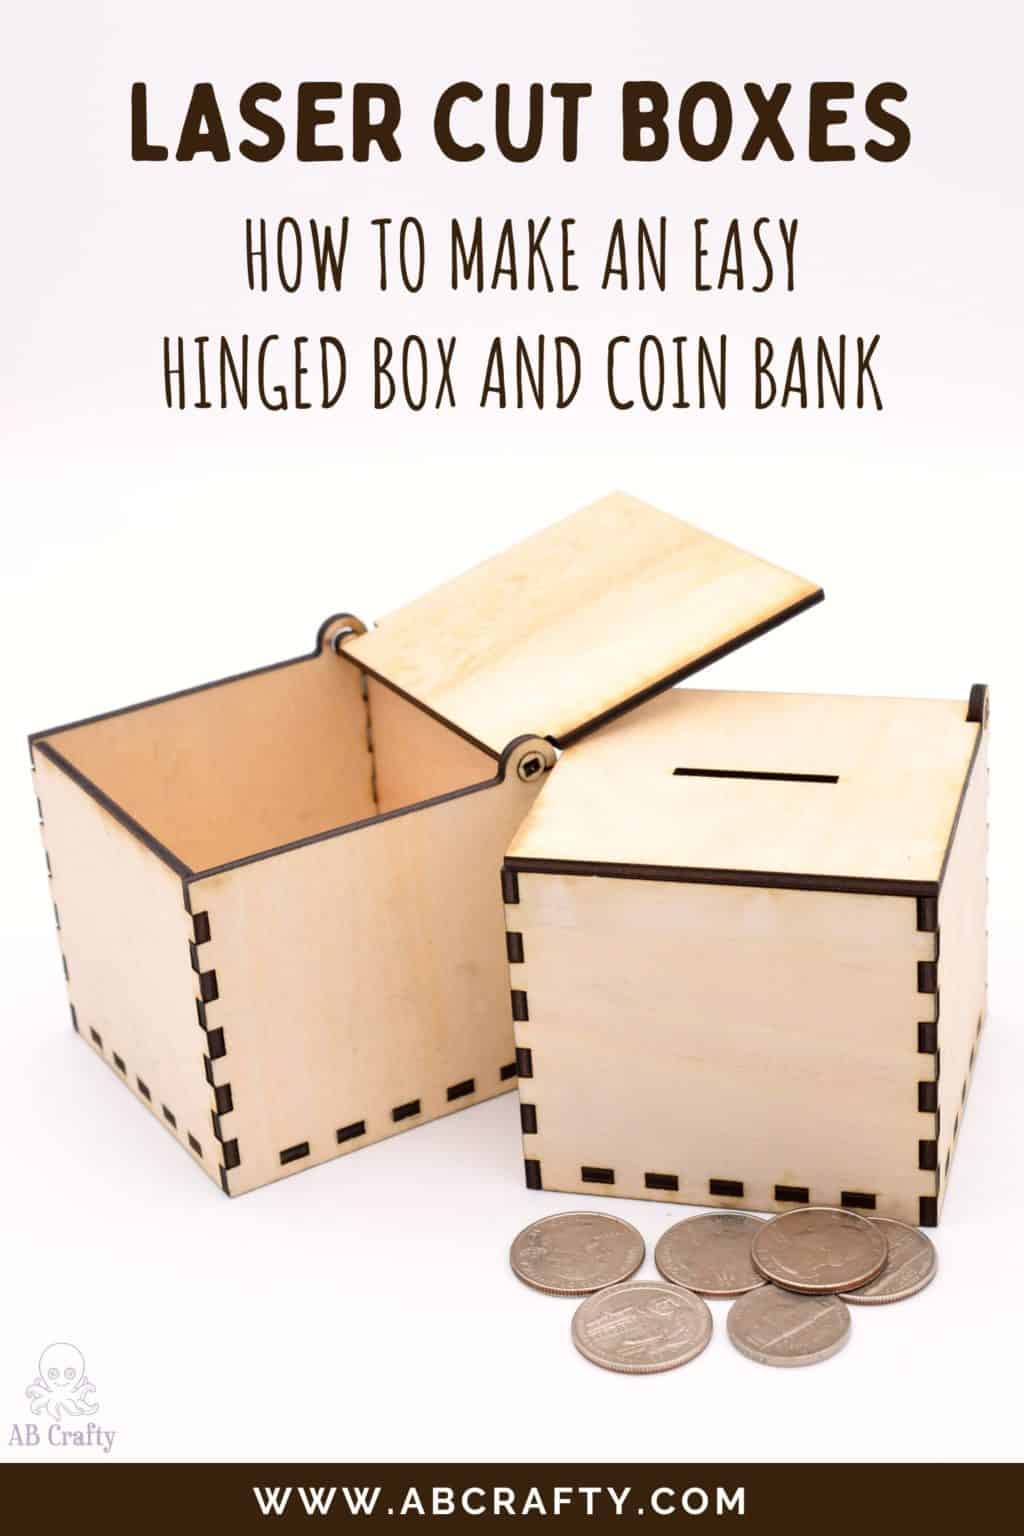 open laser cut box and laser cut coin box with coins in front. title reads "laser cut boxes - how to make an easy hinged box and coin bank, abcrafty.com"